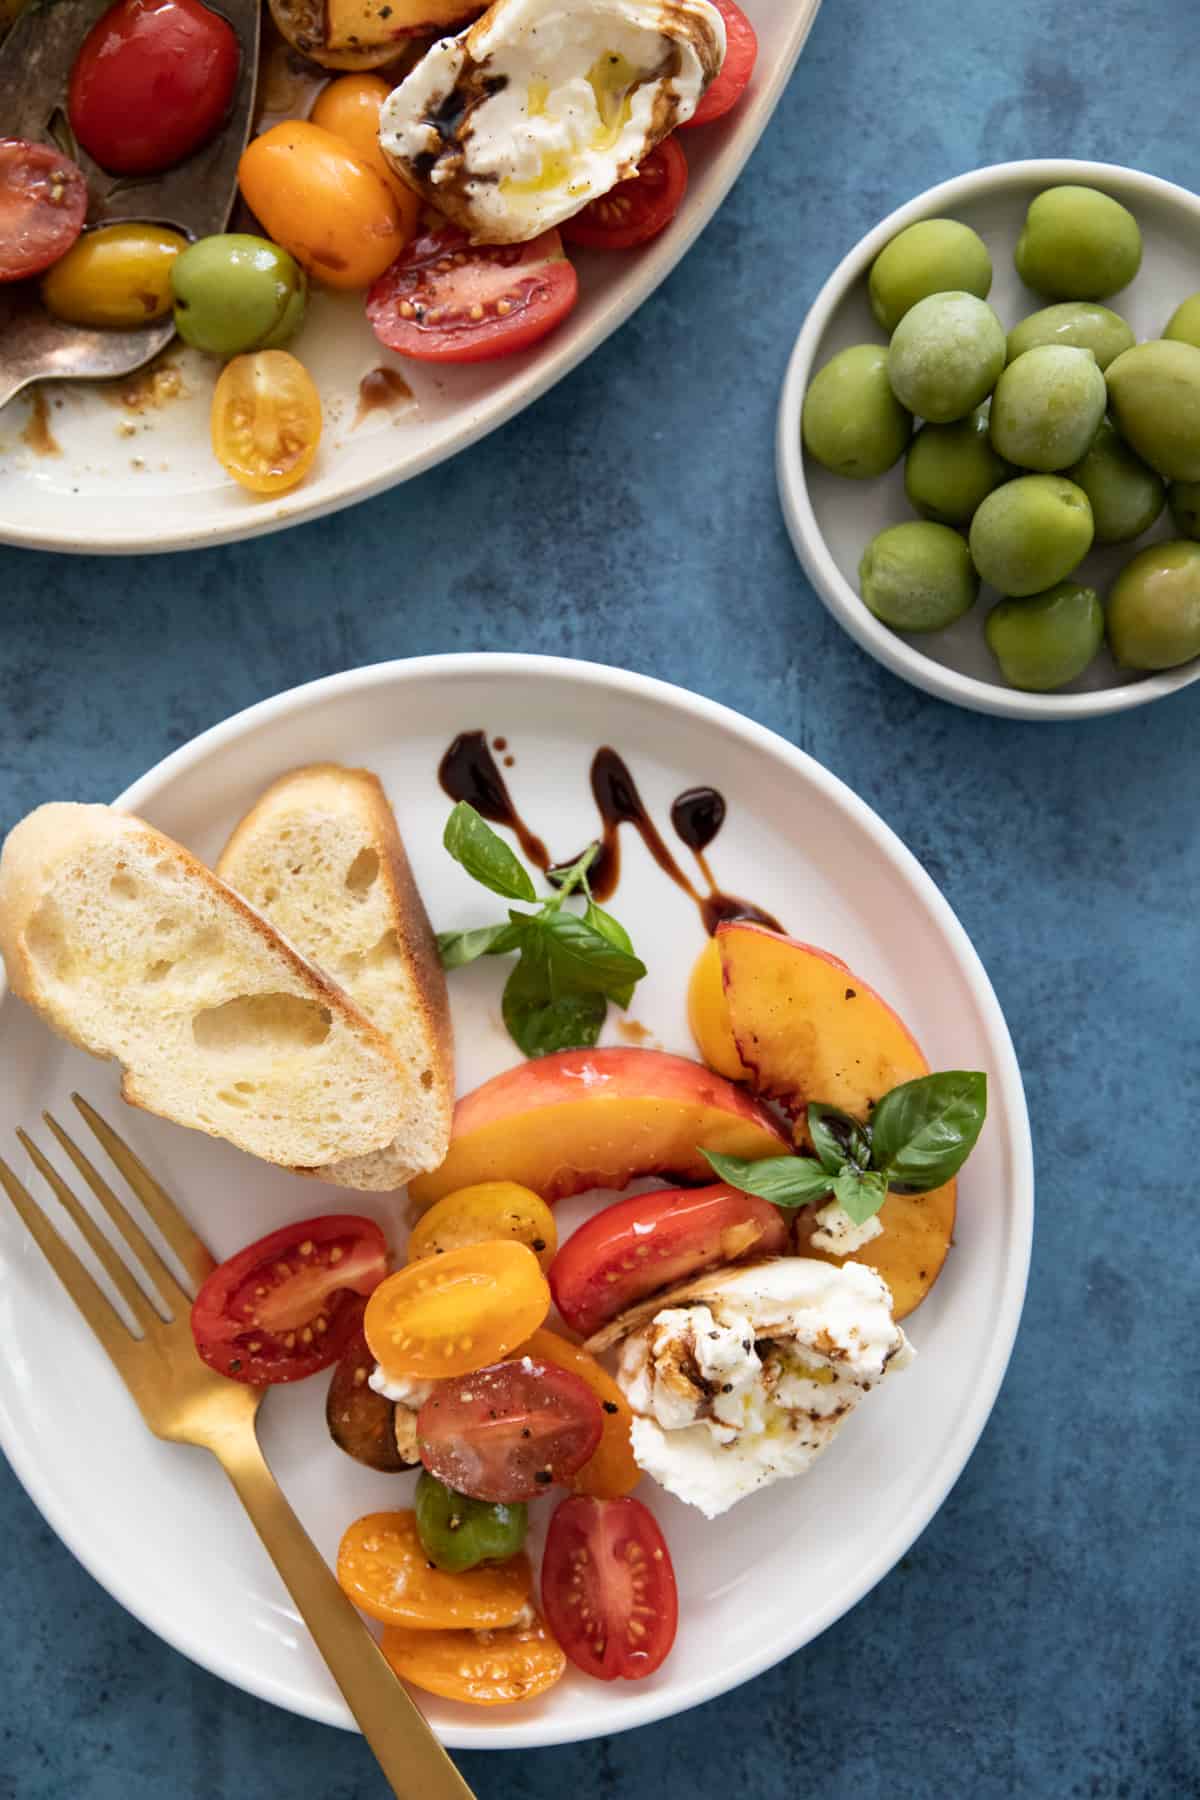 Creamy burrata with tomatoes and peaches present a delightful combination of flavors, ready in just 10 minutes. I drizzle it with balsamic glaze and serve it with crusty toasted bread as a salad or an appetizer. This dish is the perfect addition to any table!
